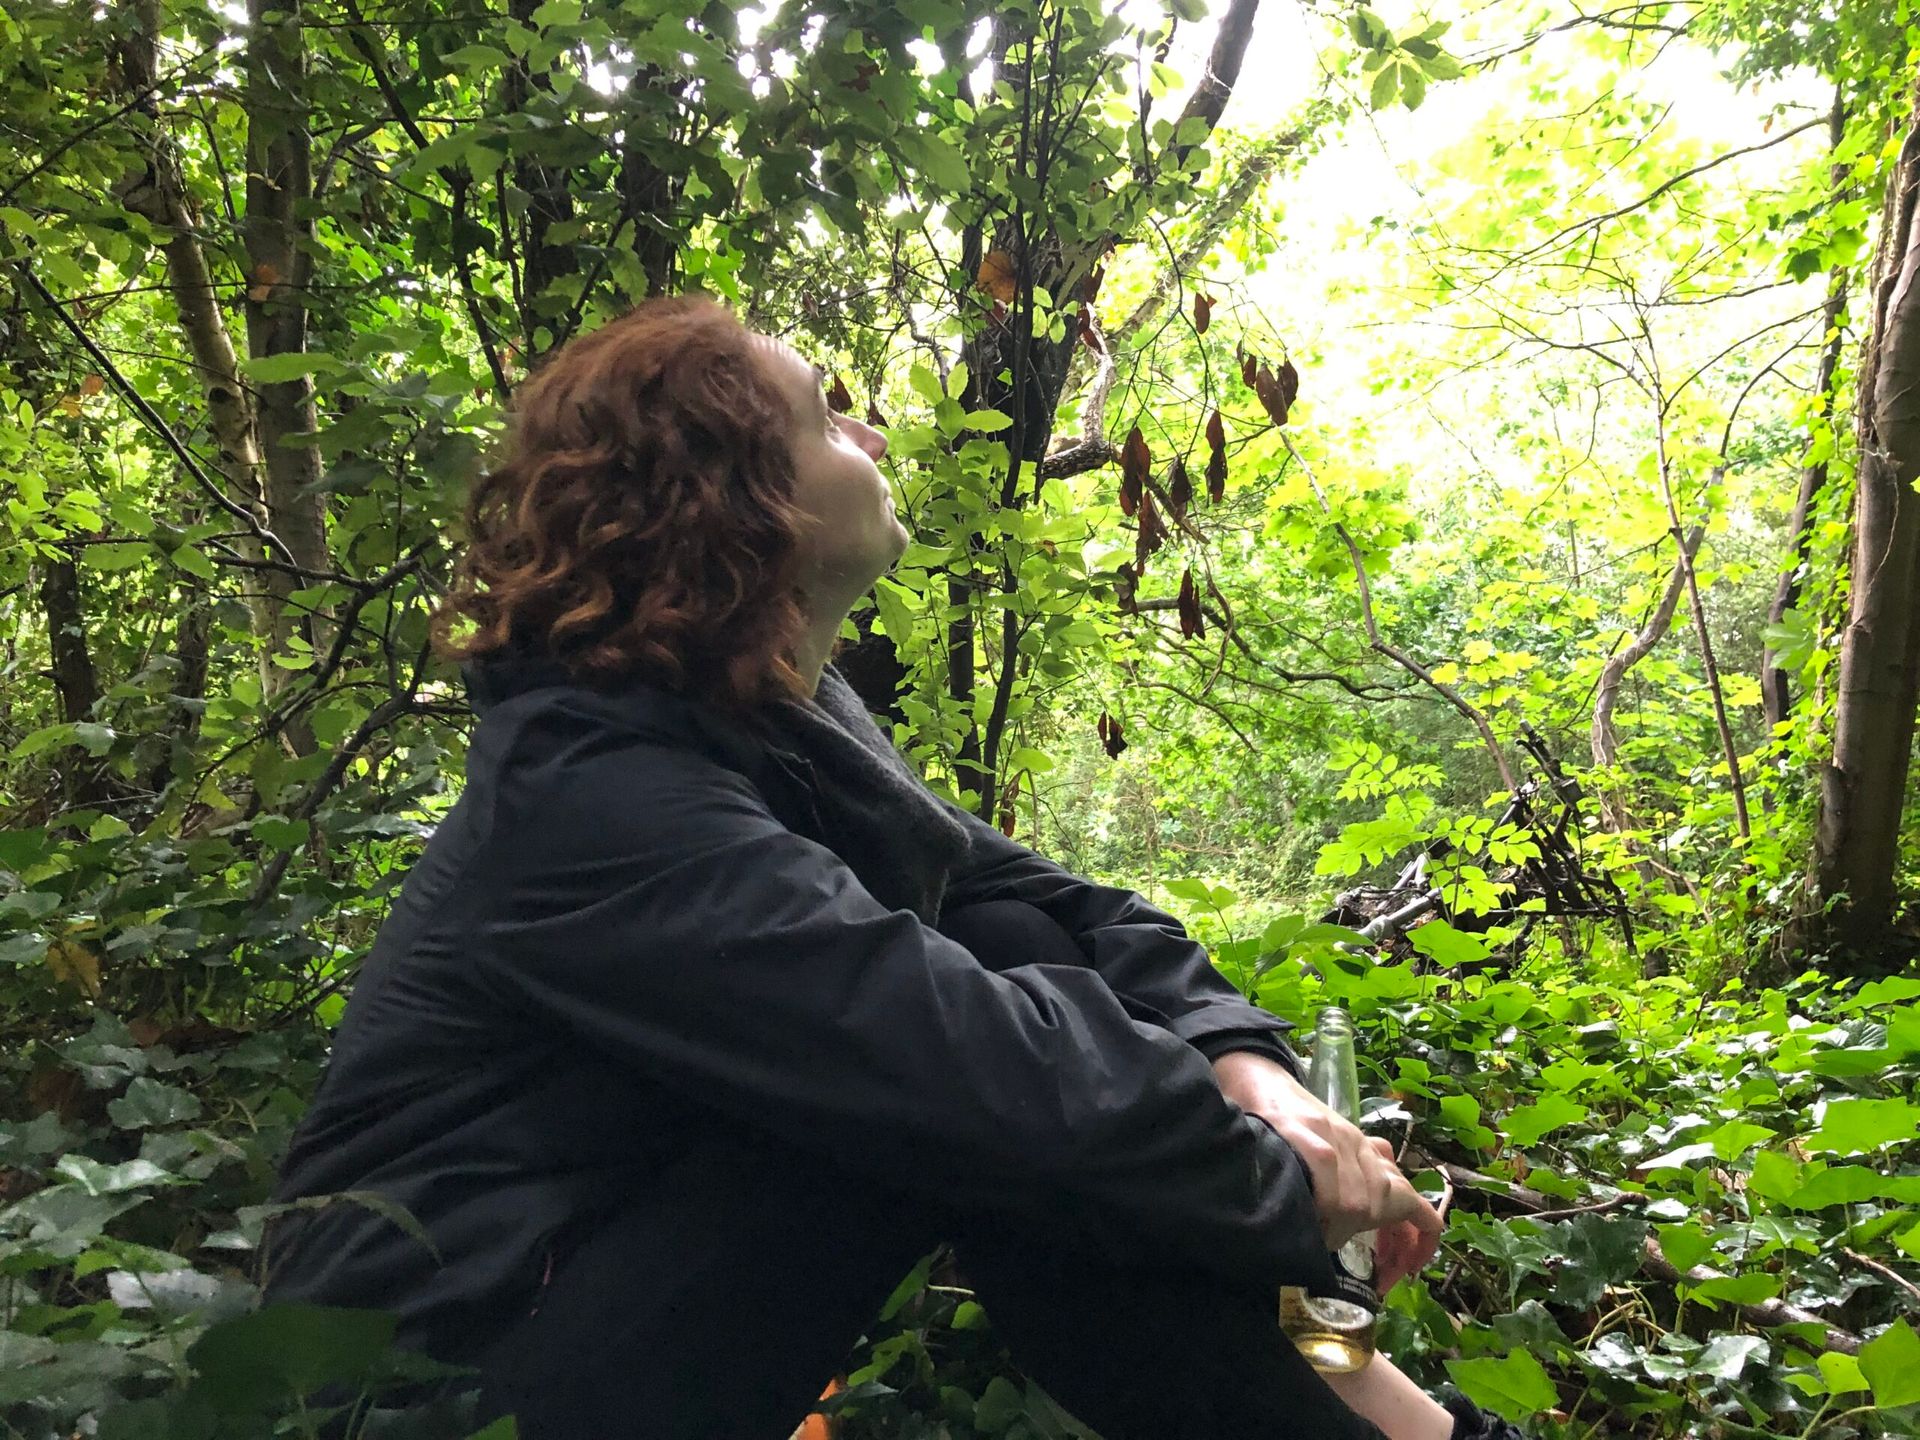 Woman sat in the woods looks up wistfully. She holds a bottle of beer. The remains of a rusted moped can be seen in the background, overgrown with greenery, almost looking like an intentional sculpture